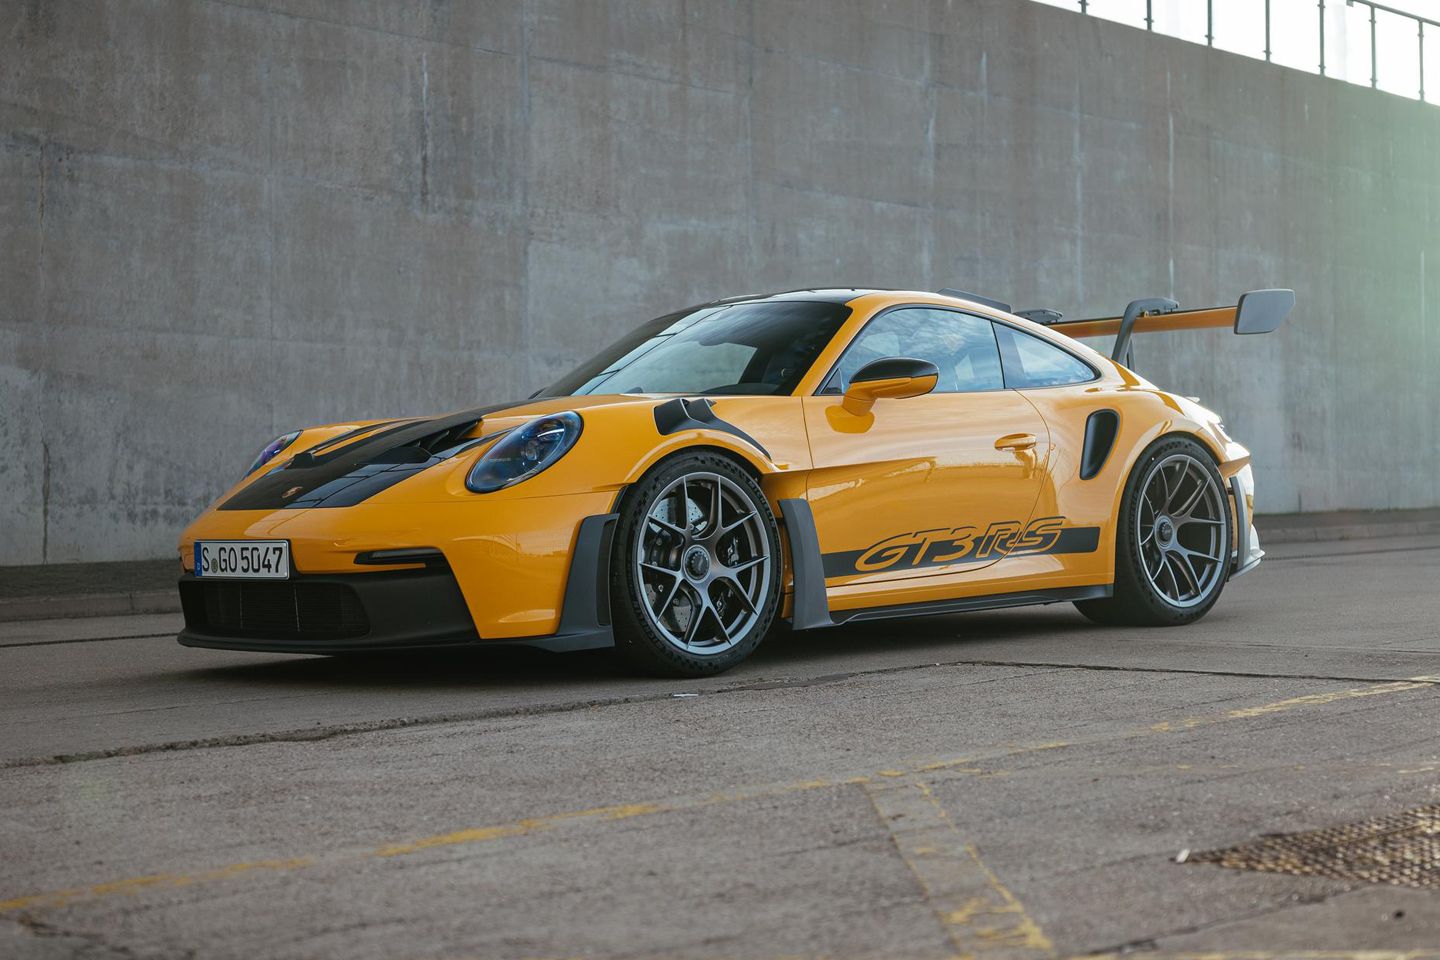 DRIVEN: Porsche's GT3 RS is lightning fast, and oh so visceral